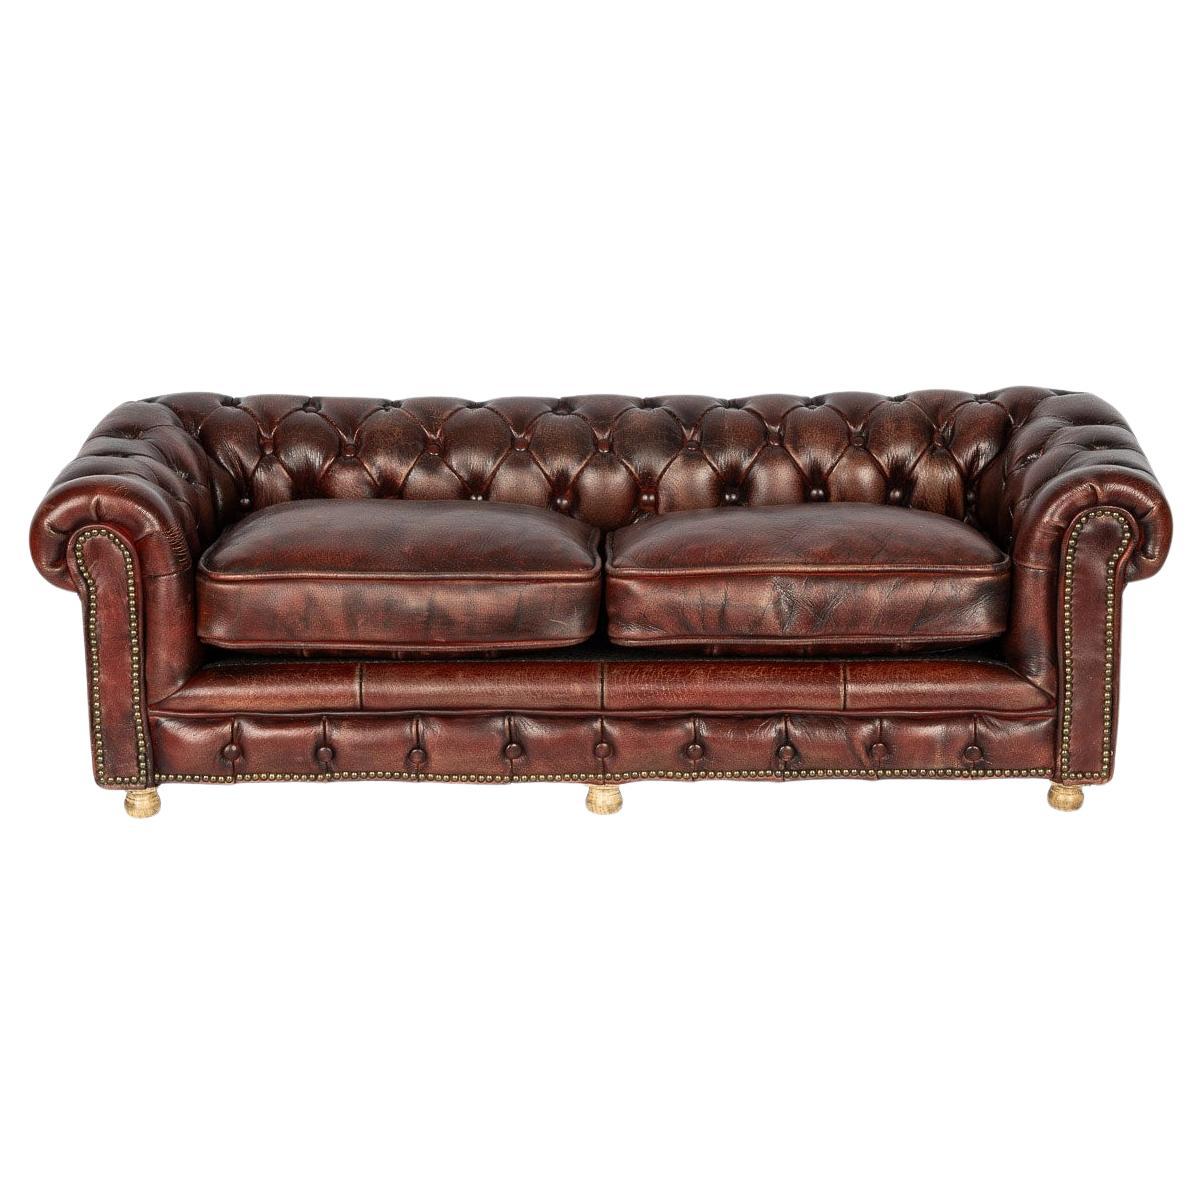 20th Century English Chesterfield Miniature Leather Sofa With Cushion Seats For Sale